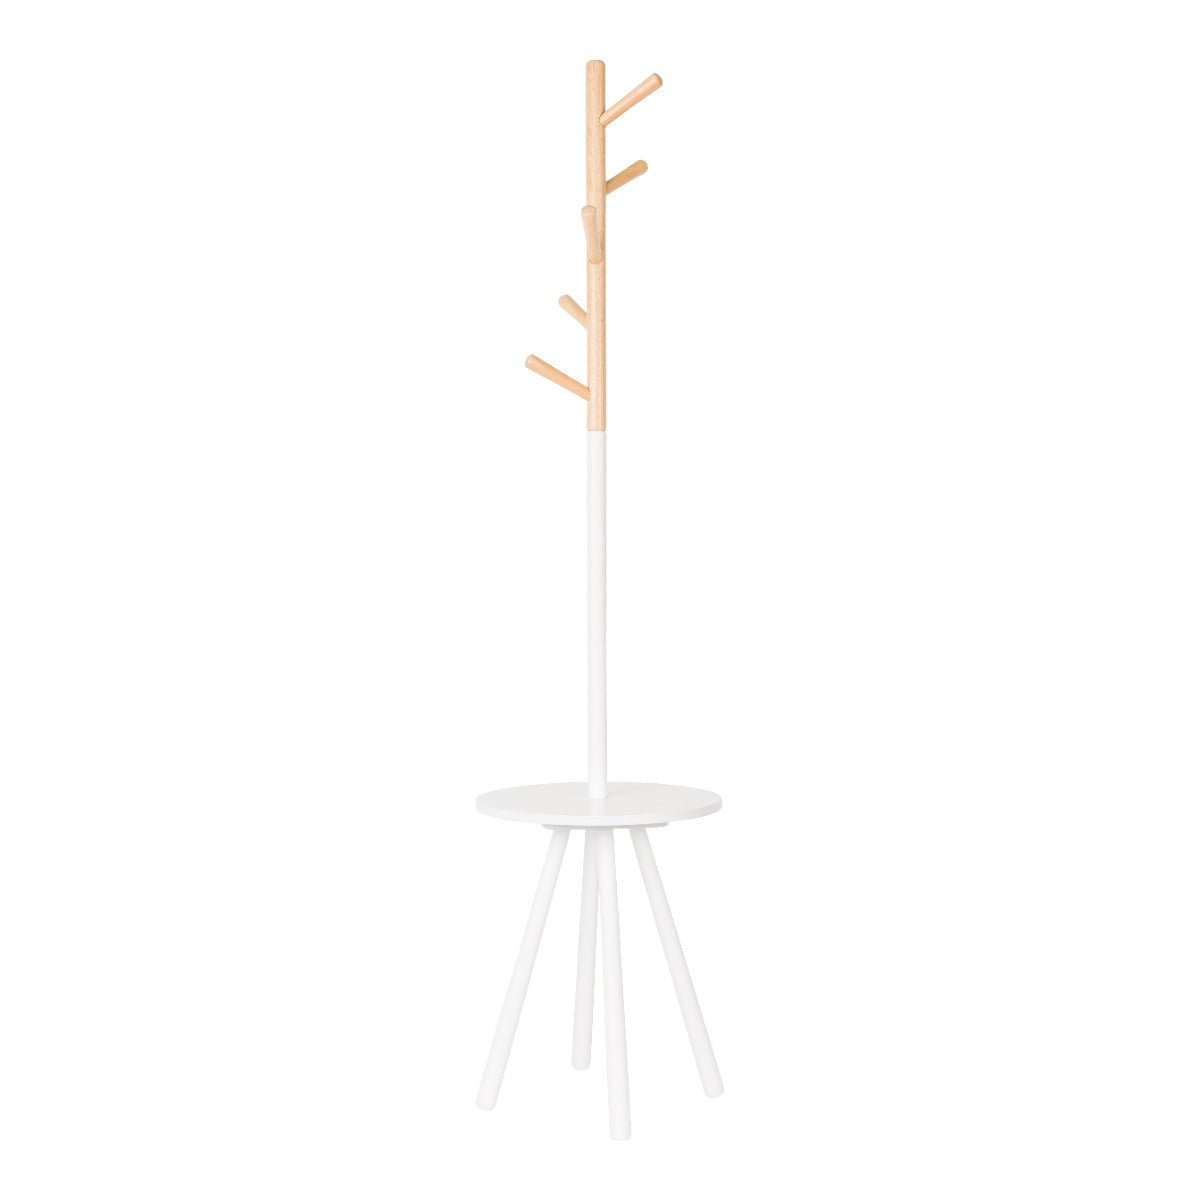 The original standing hanger Table Tree is an ideal product for people who are looking for original home accessories. Made of the highest quality wood, it will be a very useful element of equipment. It works great in the Scandinavian hallway, where you need space for outerwear as well as hats, scarves and scarves. A minimalist office where guests have nothing to do with jackets until he asks to put him there.